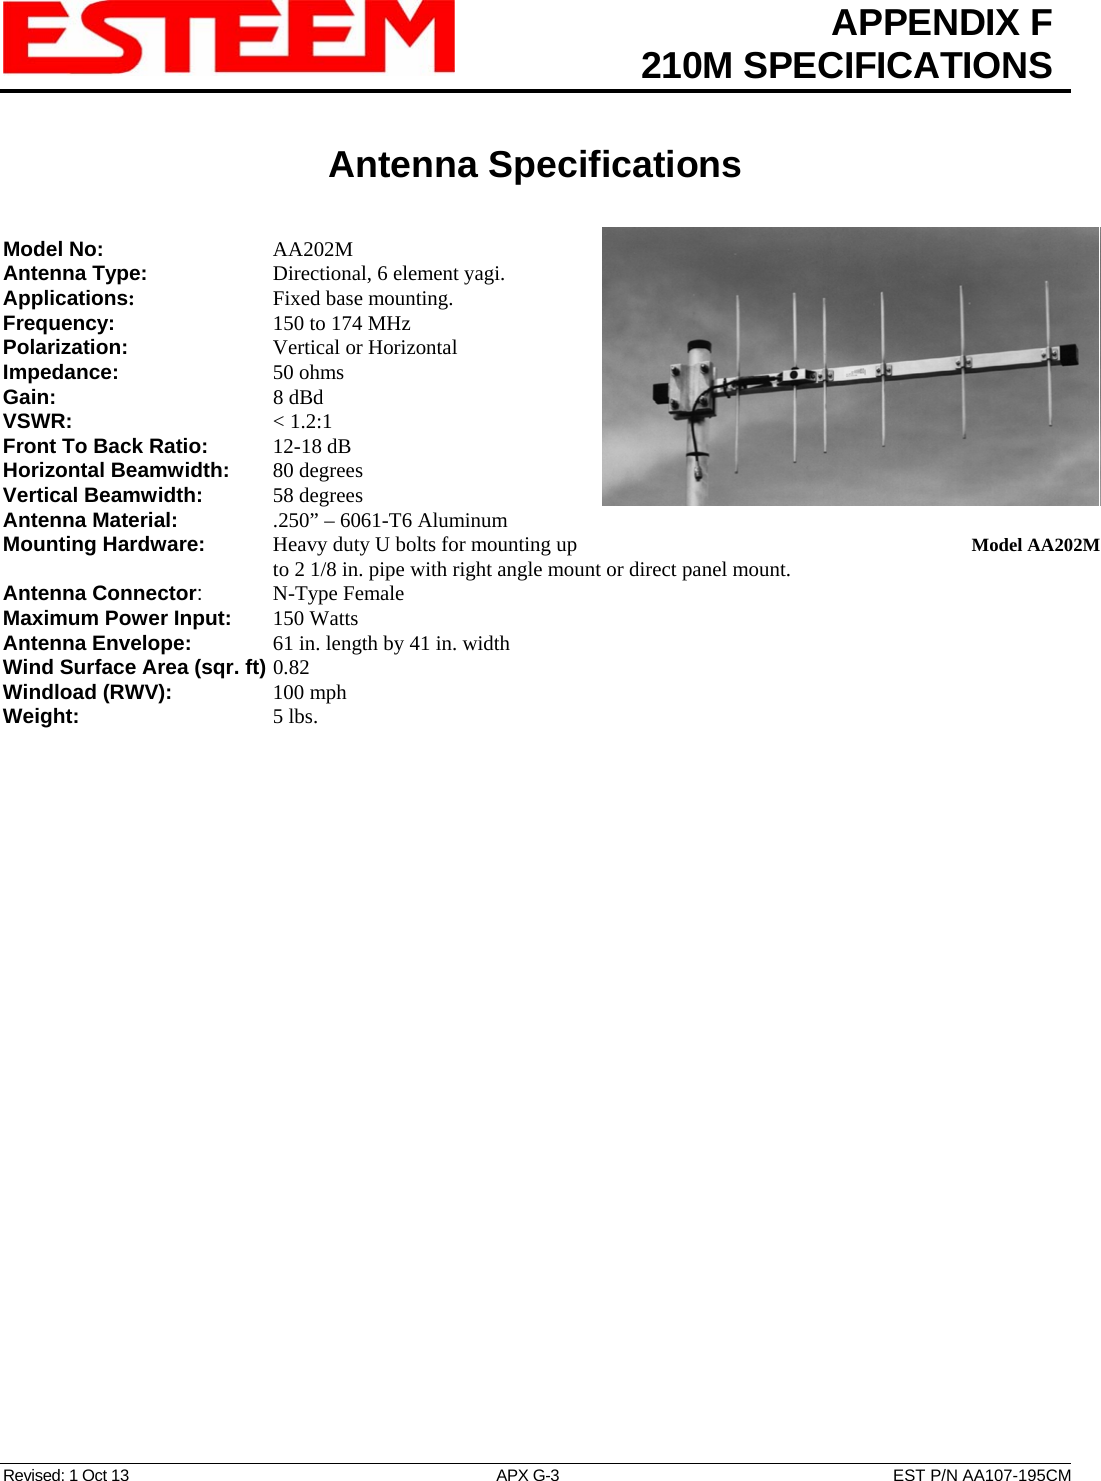  APPENDIX F  210M SPECIFICATIONS   Antenna Specifications   Revised: 1 Oct 13  APX G-3  EST P/N AA107-195CM Model No:    AA202M Antenna Type:      Directional, 6 element yagi.  Applications:    Fixed base mounting. Frequency:    150 to 174 MHz  Polarization:    Vertical or Horizontal Impedance:    50 ohms Gain:     8 dBd VSWR:      &lt; 1.2:1  Front To Back Ratio:   12-18 dB Horizontal Beamwidth:  80 degrees Vertical Beamwidth:      58 degrees Antenna Material:     .250” – 6061-T6 Aluminum  Mounting Hardware:      Heavy duty U bolts for mounting up to 2 1/8 in. pipe with right angle mount or direct panel mount.   Model AA202MAntenna Connector:   N-Type Female Maximum Power Input: 150 Watts Antenna Envelope:    61 in. length by 41 in. width Wind Surface Area (sqr. ft) 0.82 Windload (RWV):   100 mph Weight:     5 lbs.        